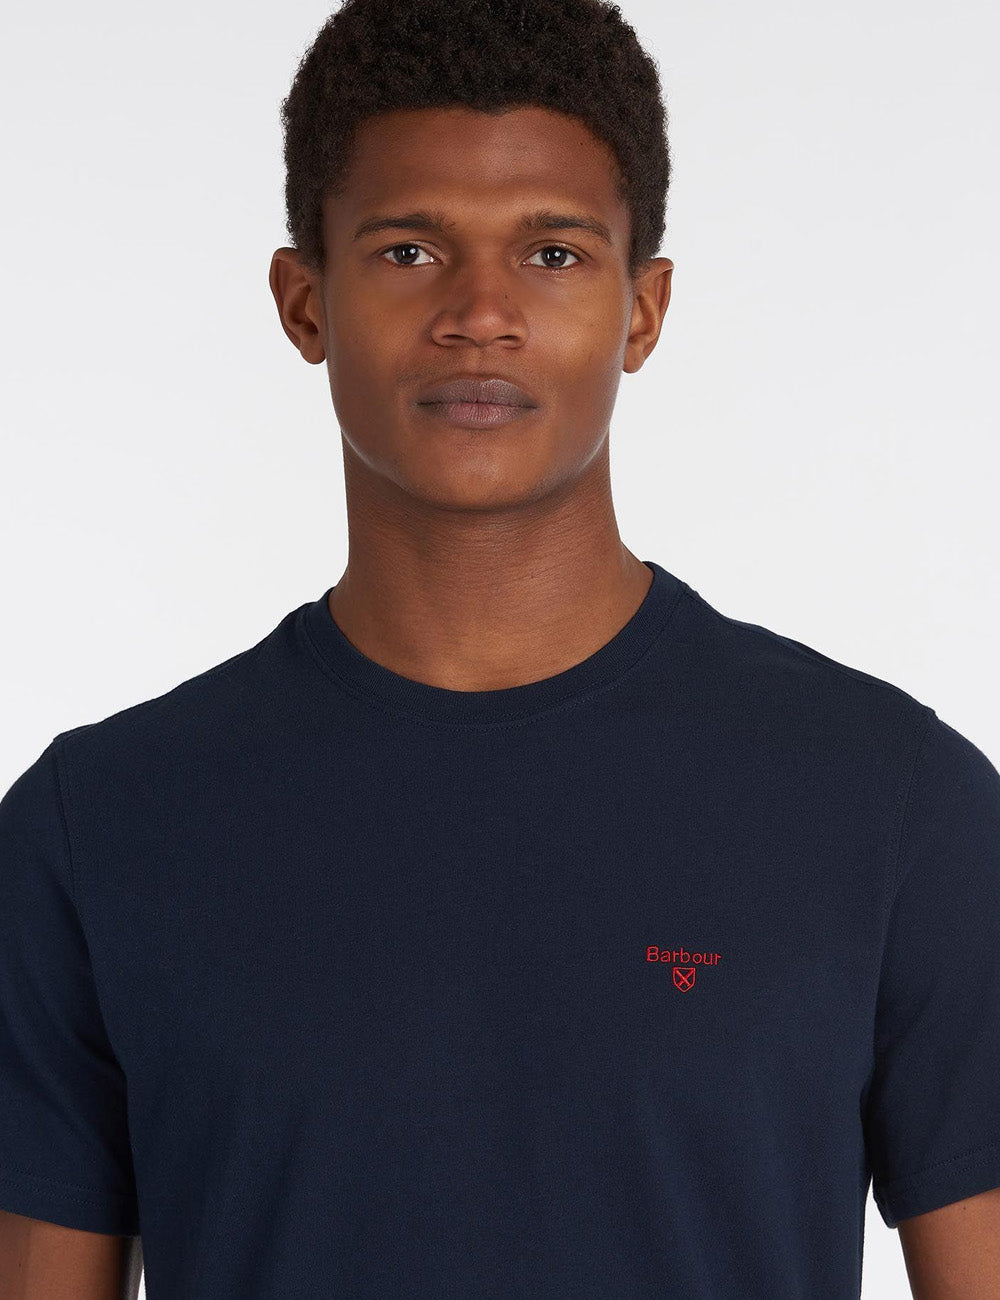 Barbour Sports T-Shirt - Navy